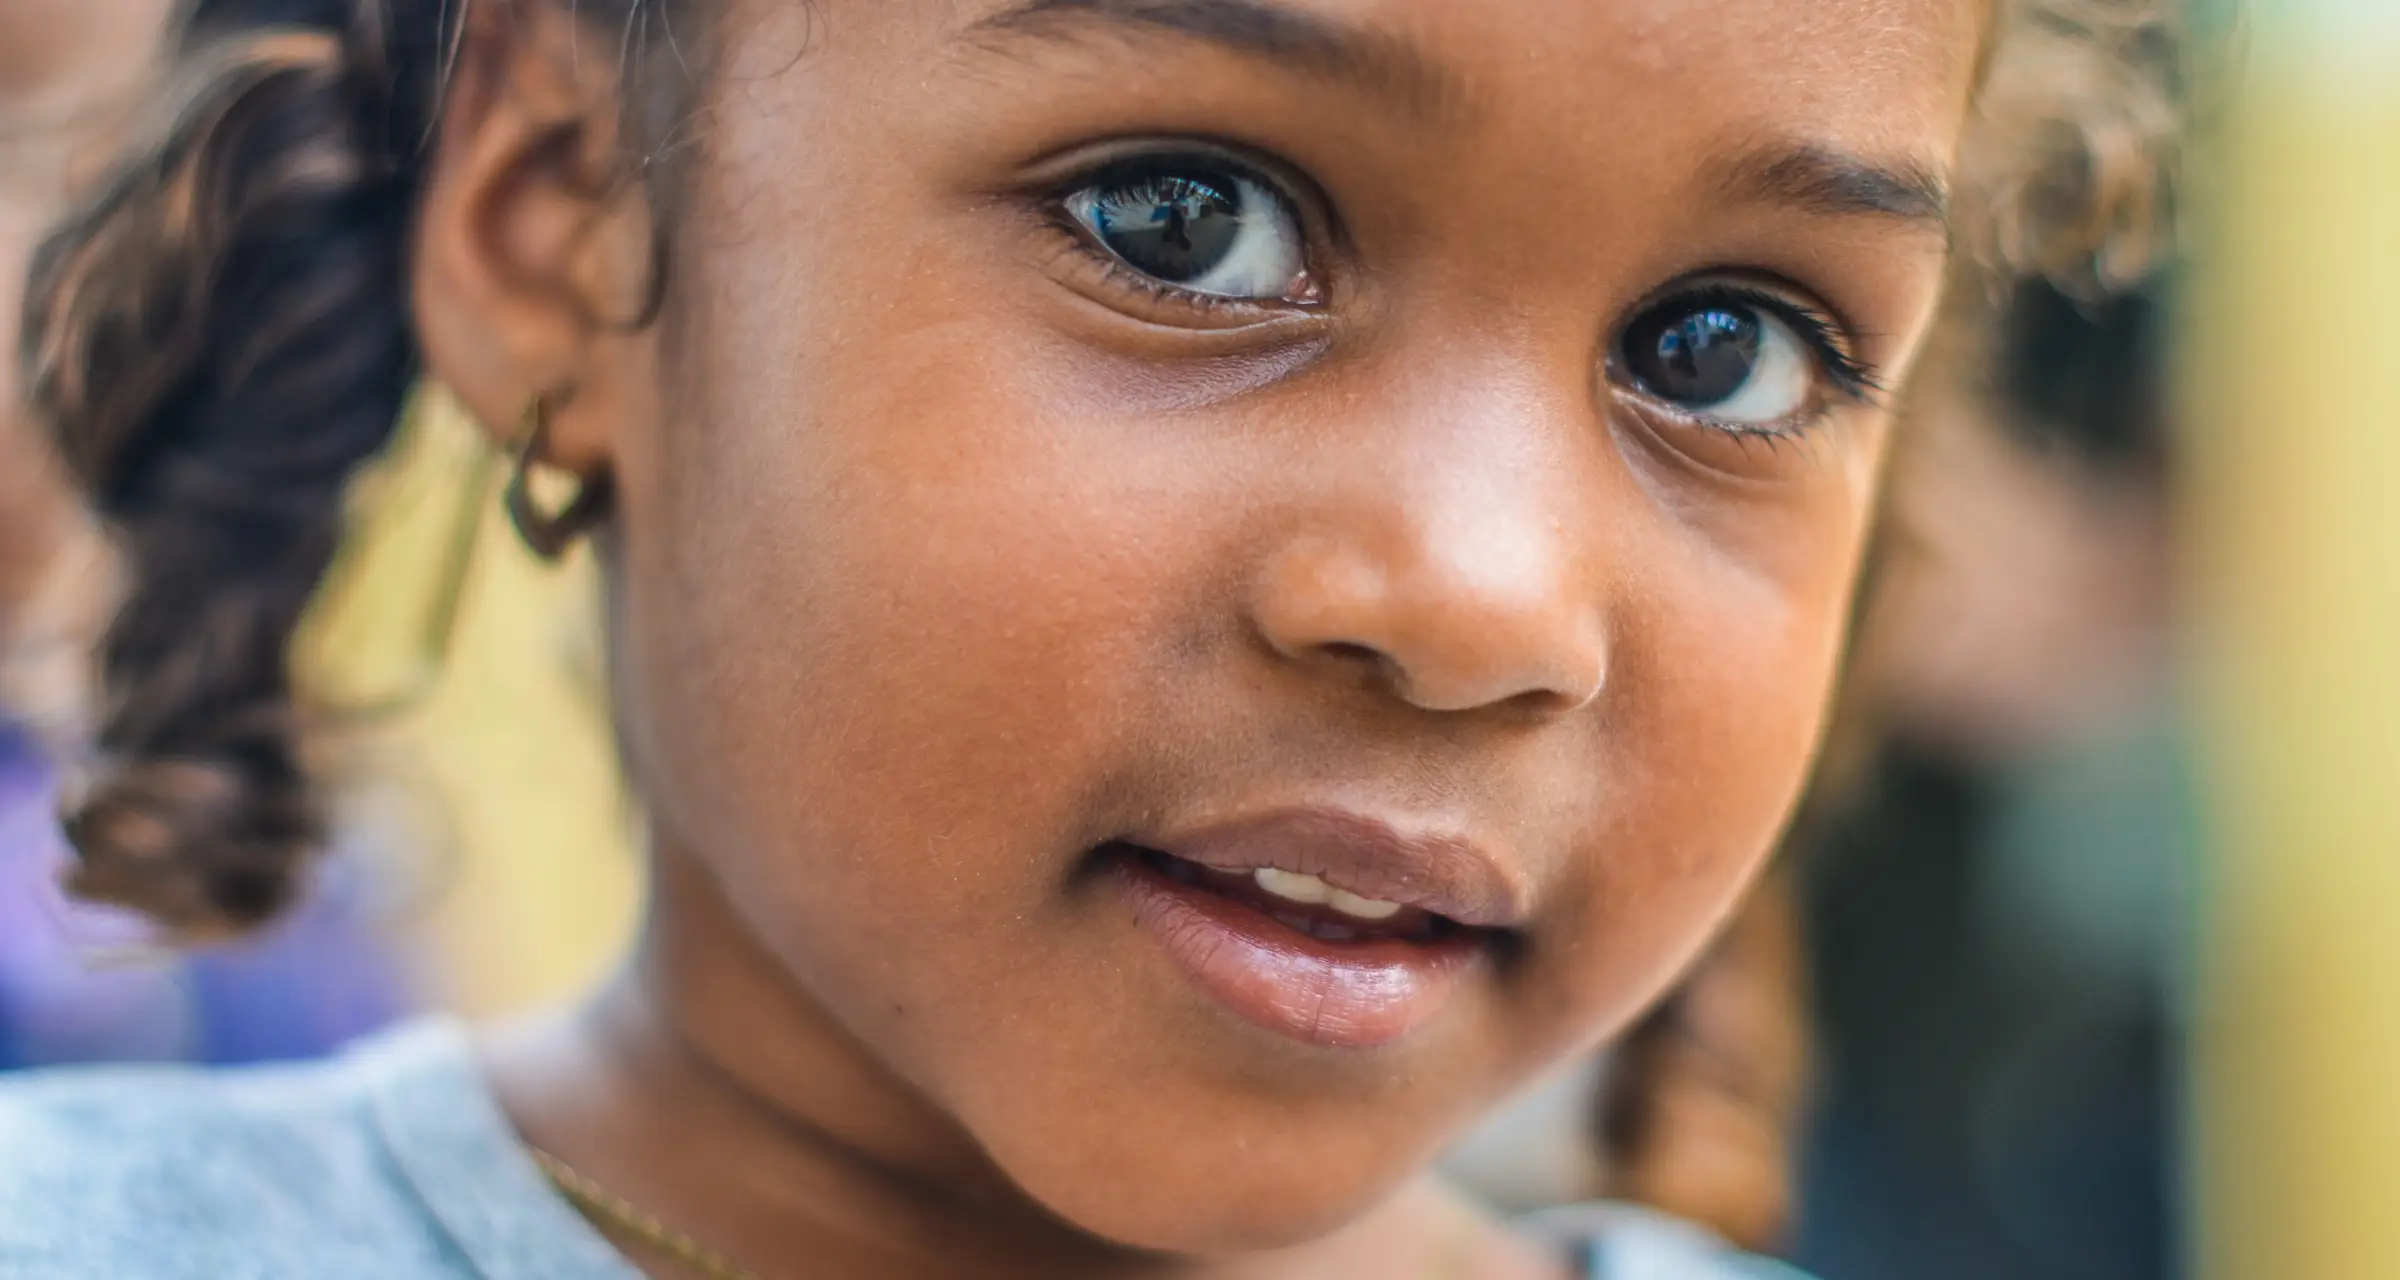 Close up of a young black child's face